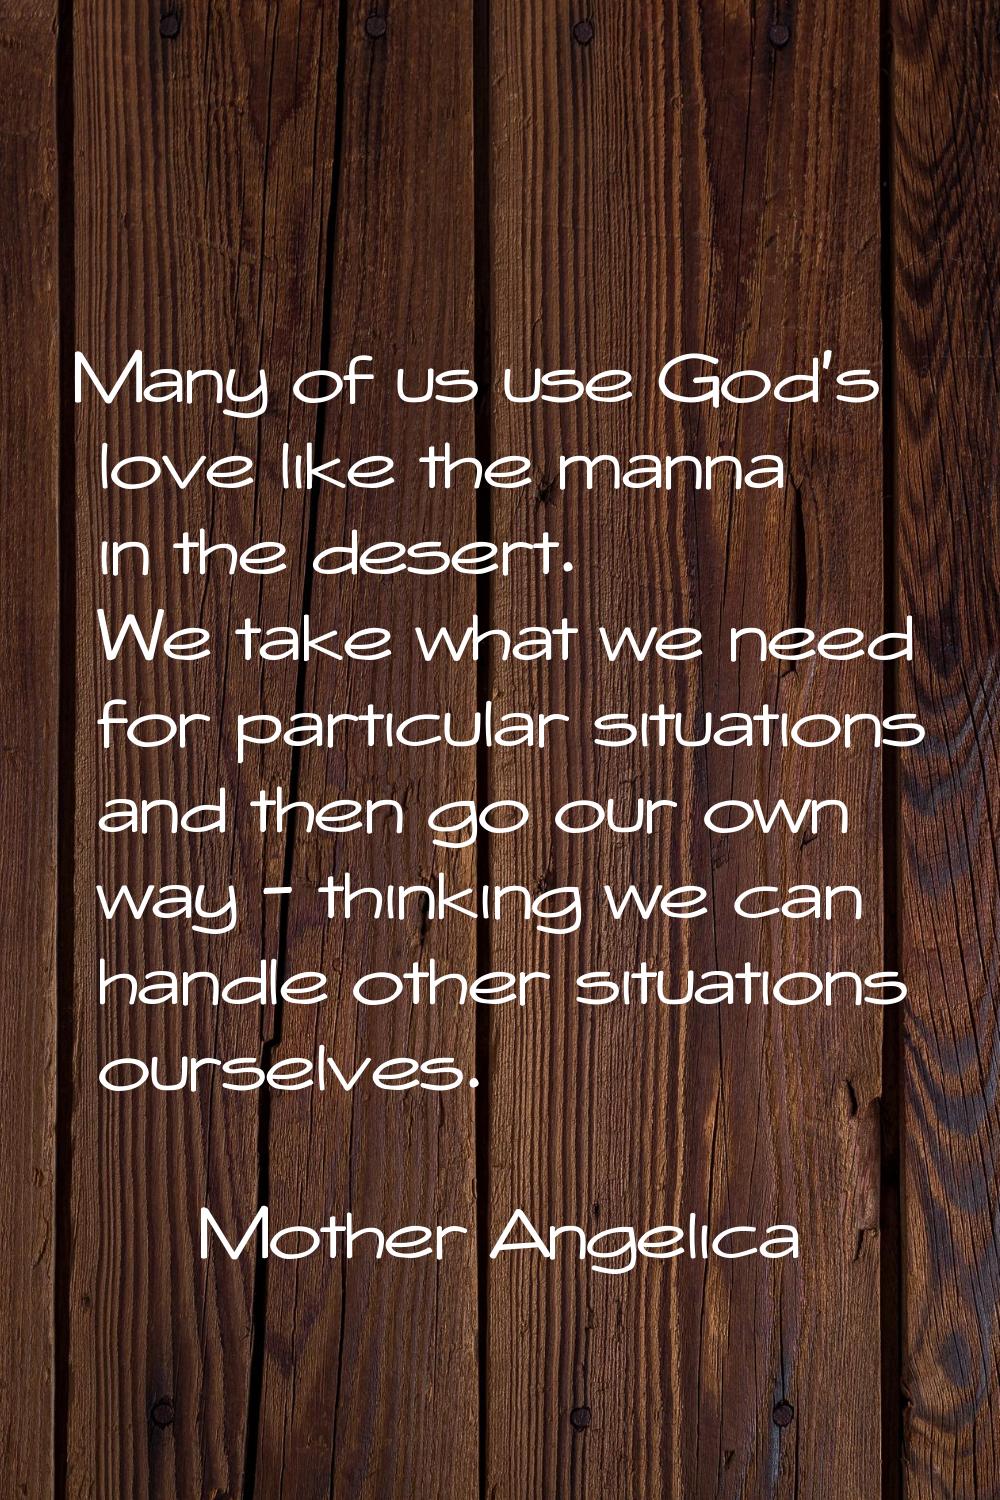 Many of us use God's love like the manna in the desert. We take what we need for particular situati